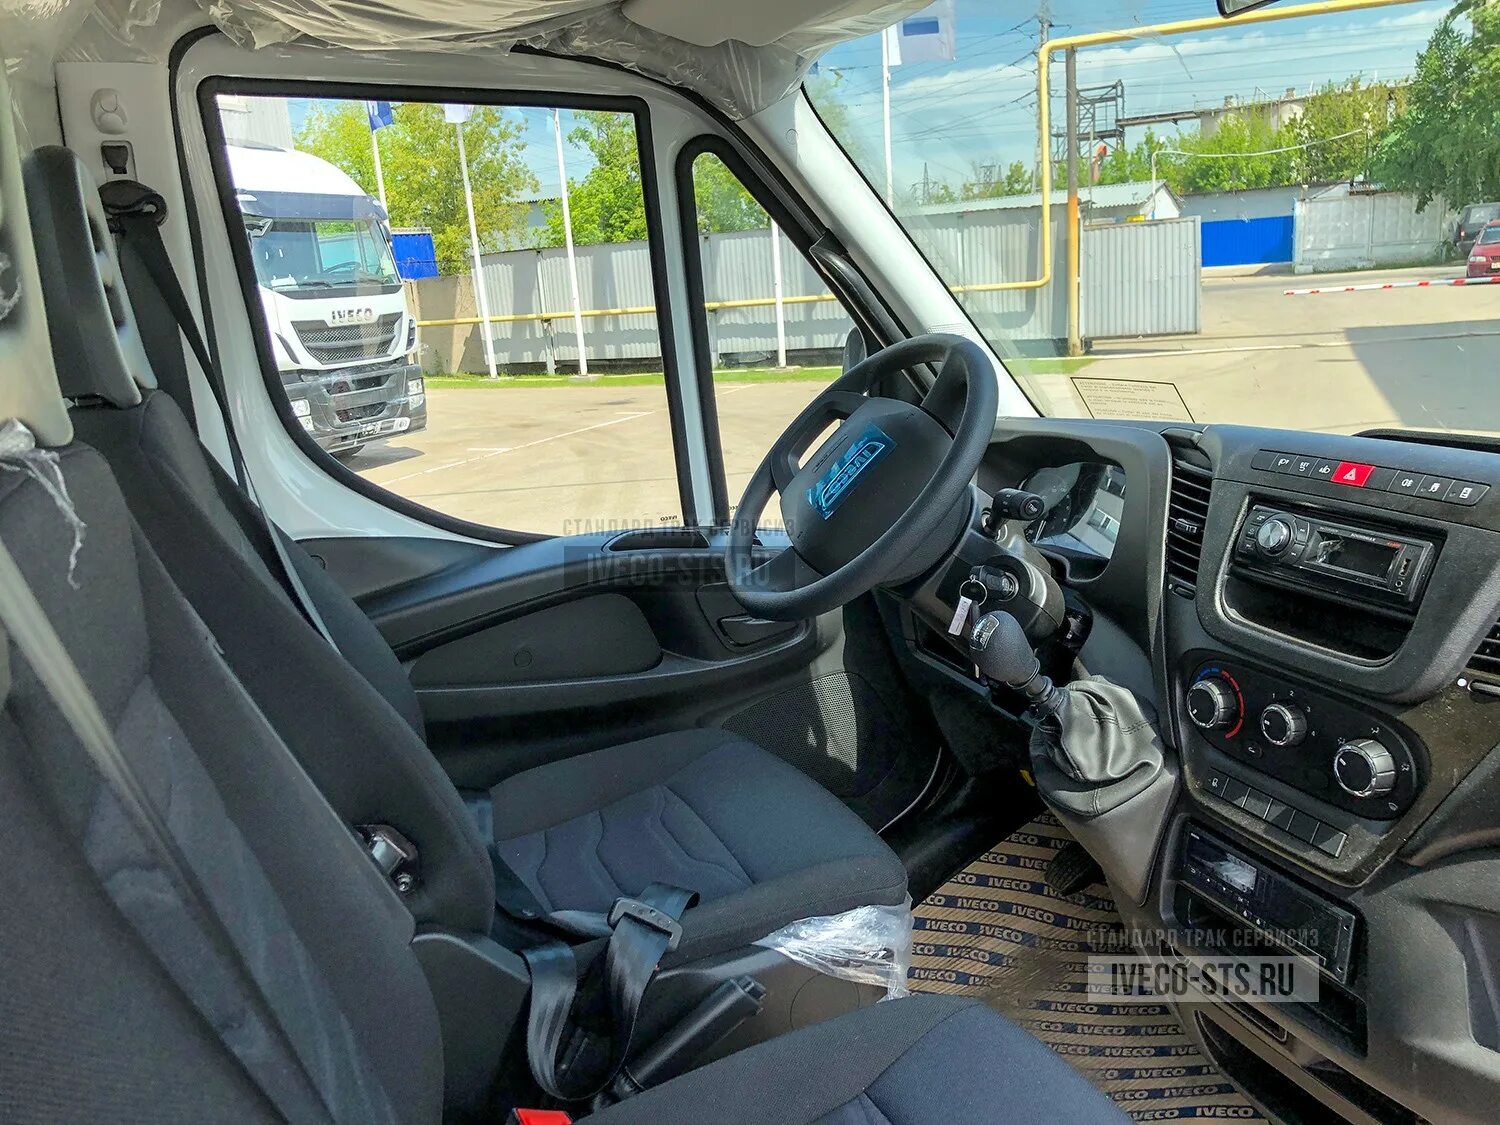 Iveco Daily van 2011 салон. Iveco Daily 2020 кабина. Iveco Daily бортовой 2021. Iveco Daily 70c кабина. Кабина дейли